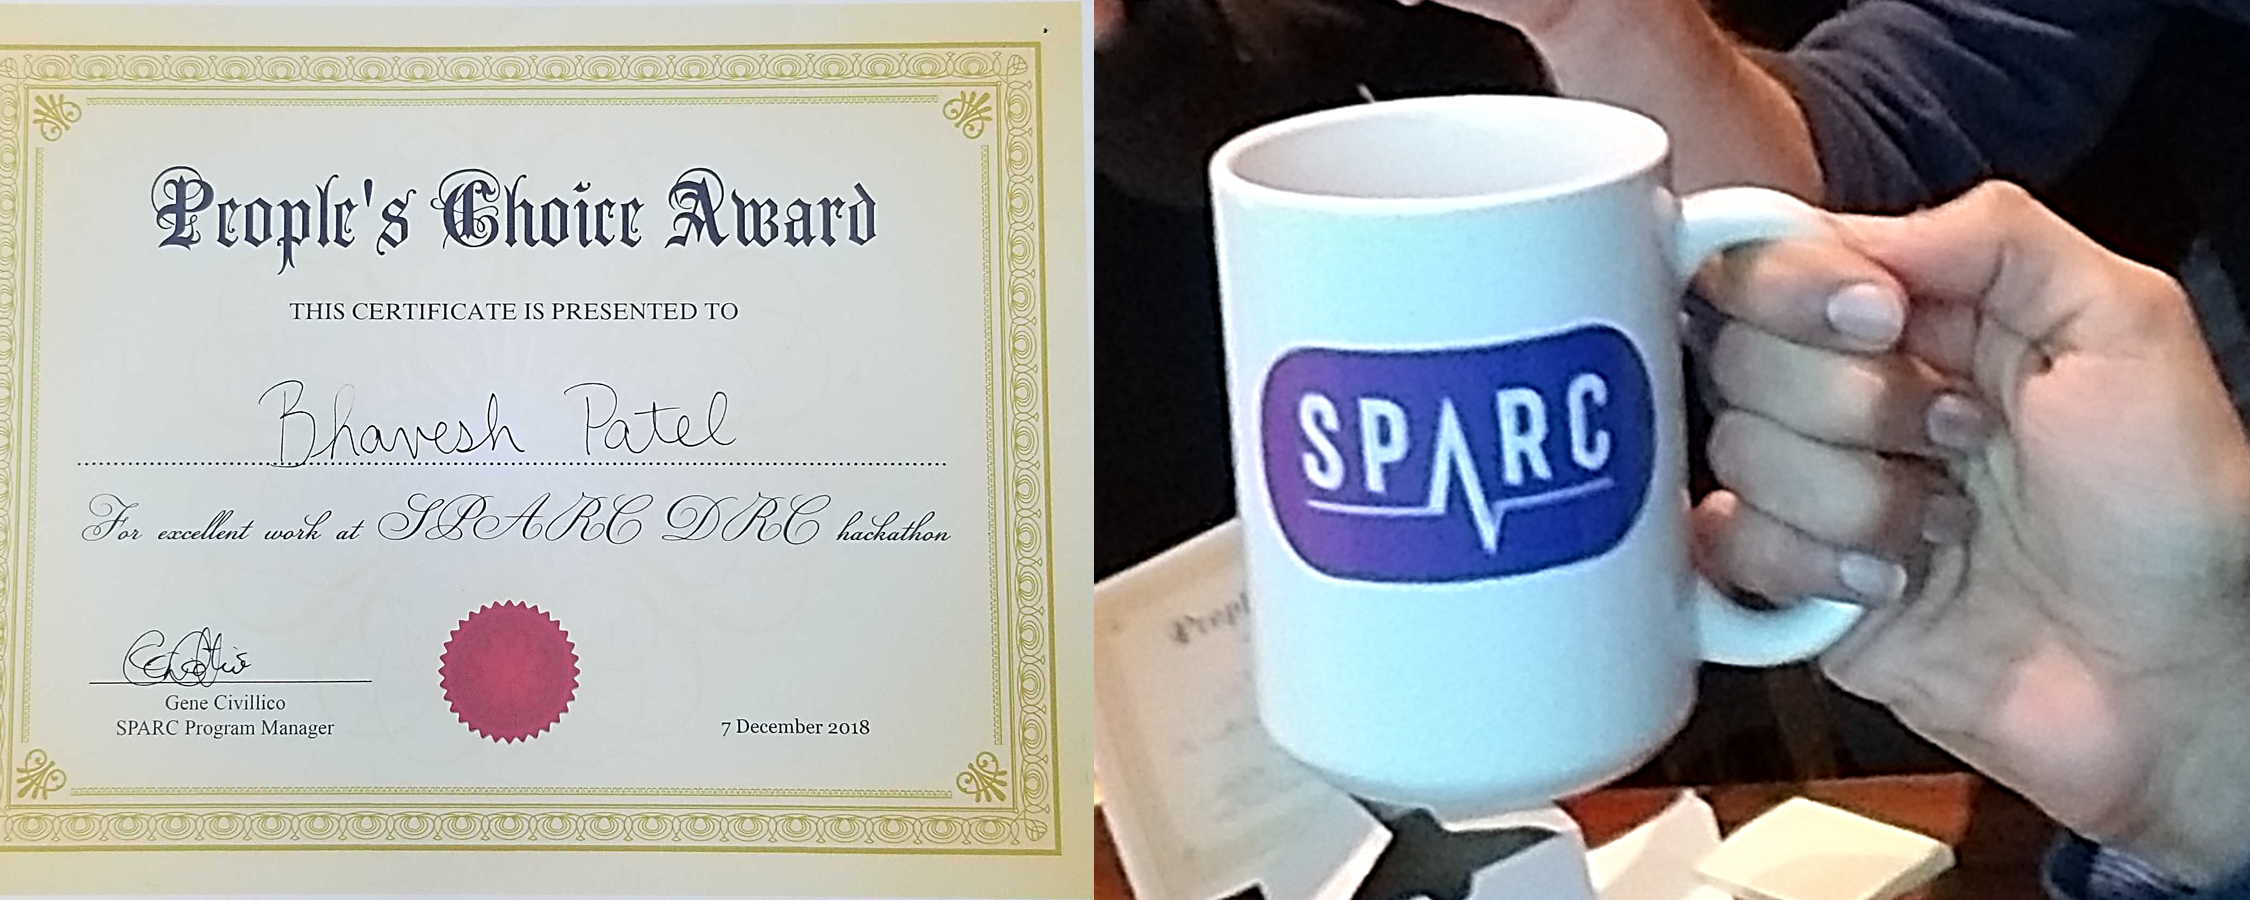 The SPARC 2018 People's Choice Award certificate (left) along with the famous winning “trophy” (right).